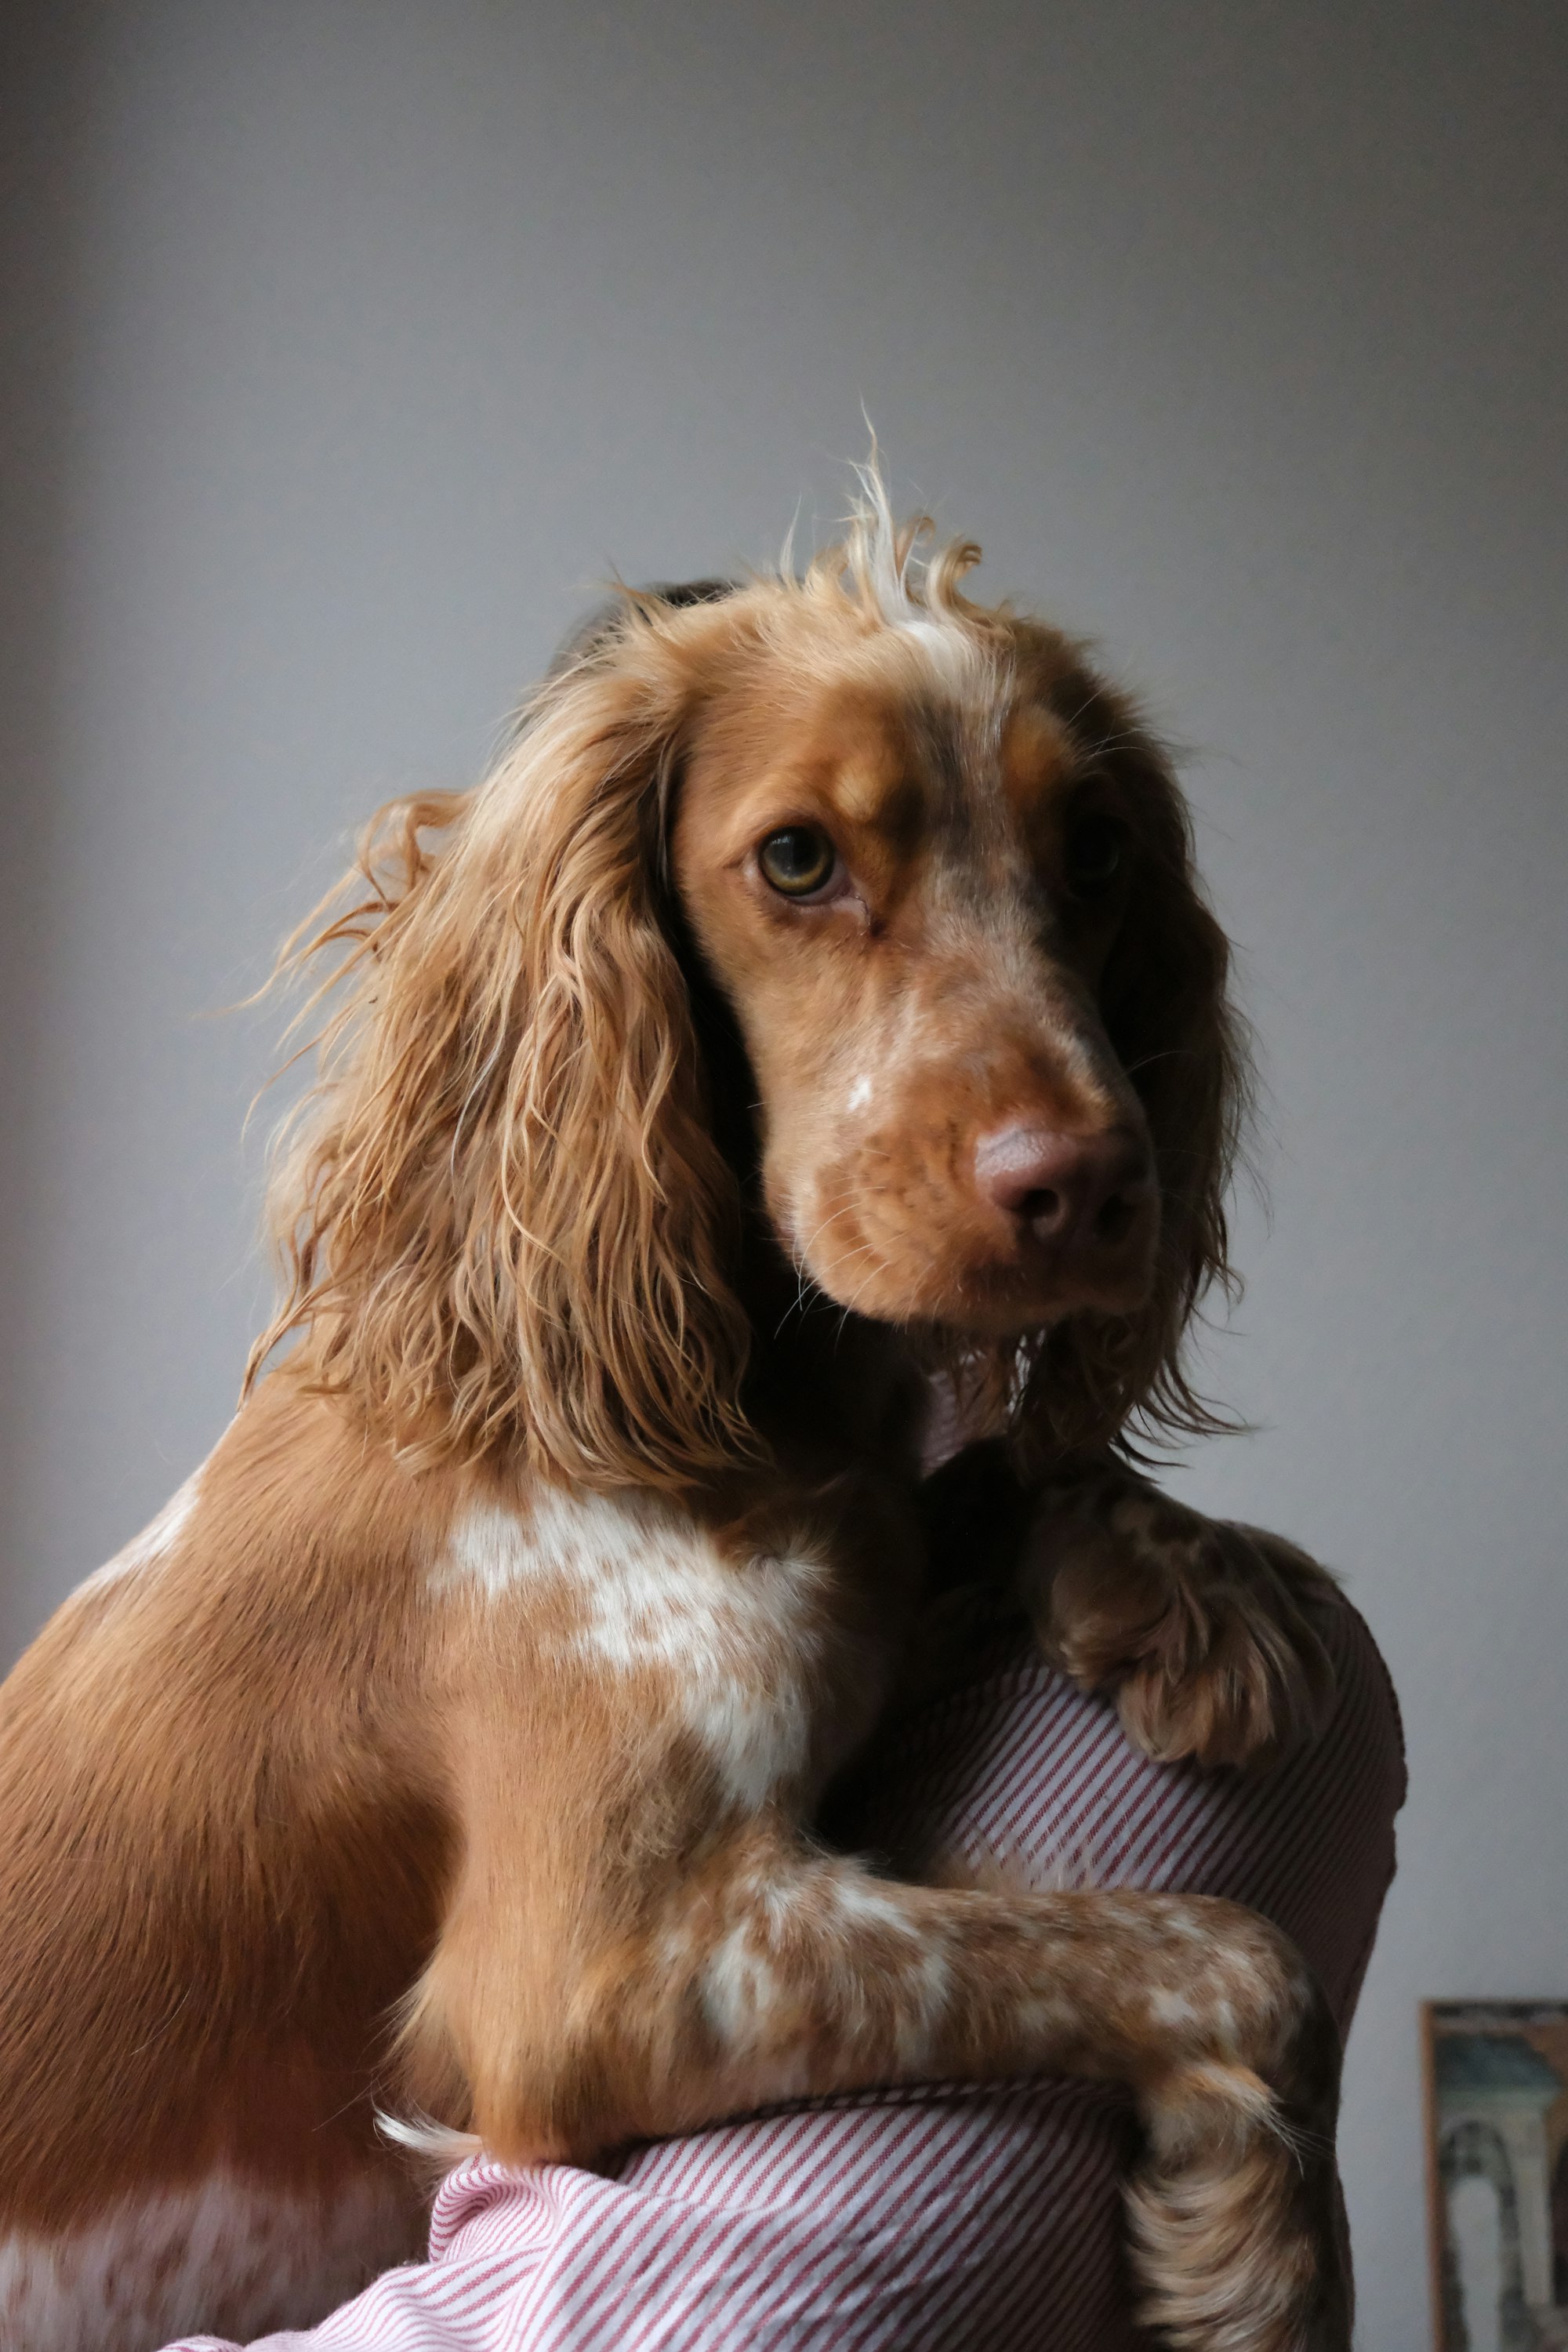 Cocker Spaniel: From Pup to Full-Grown Beauty